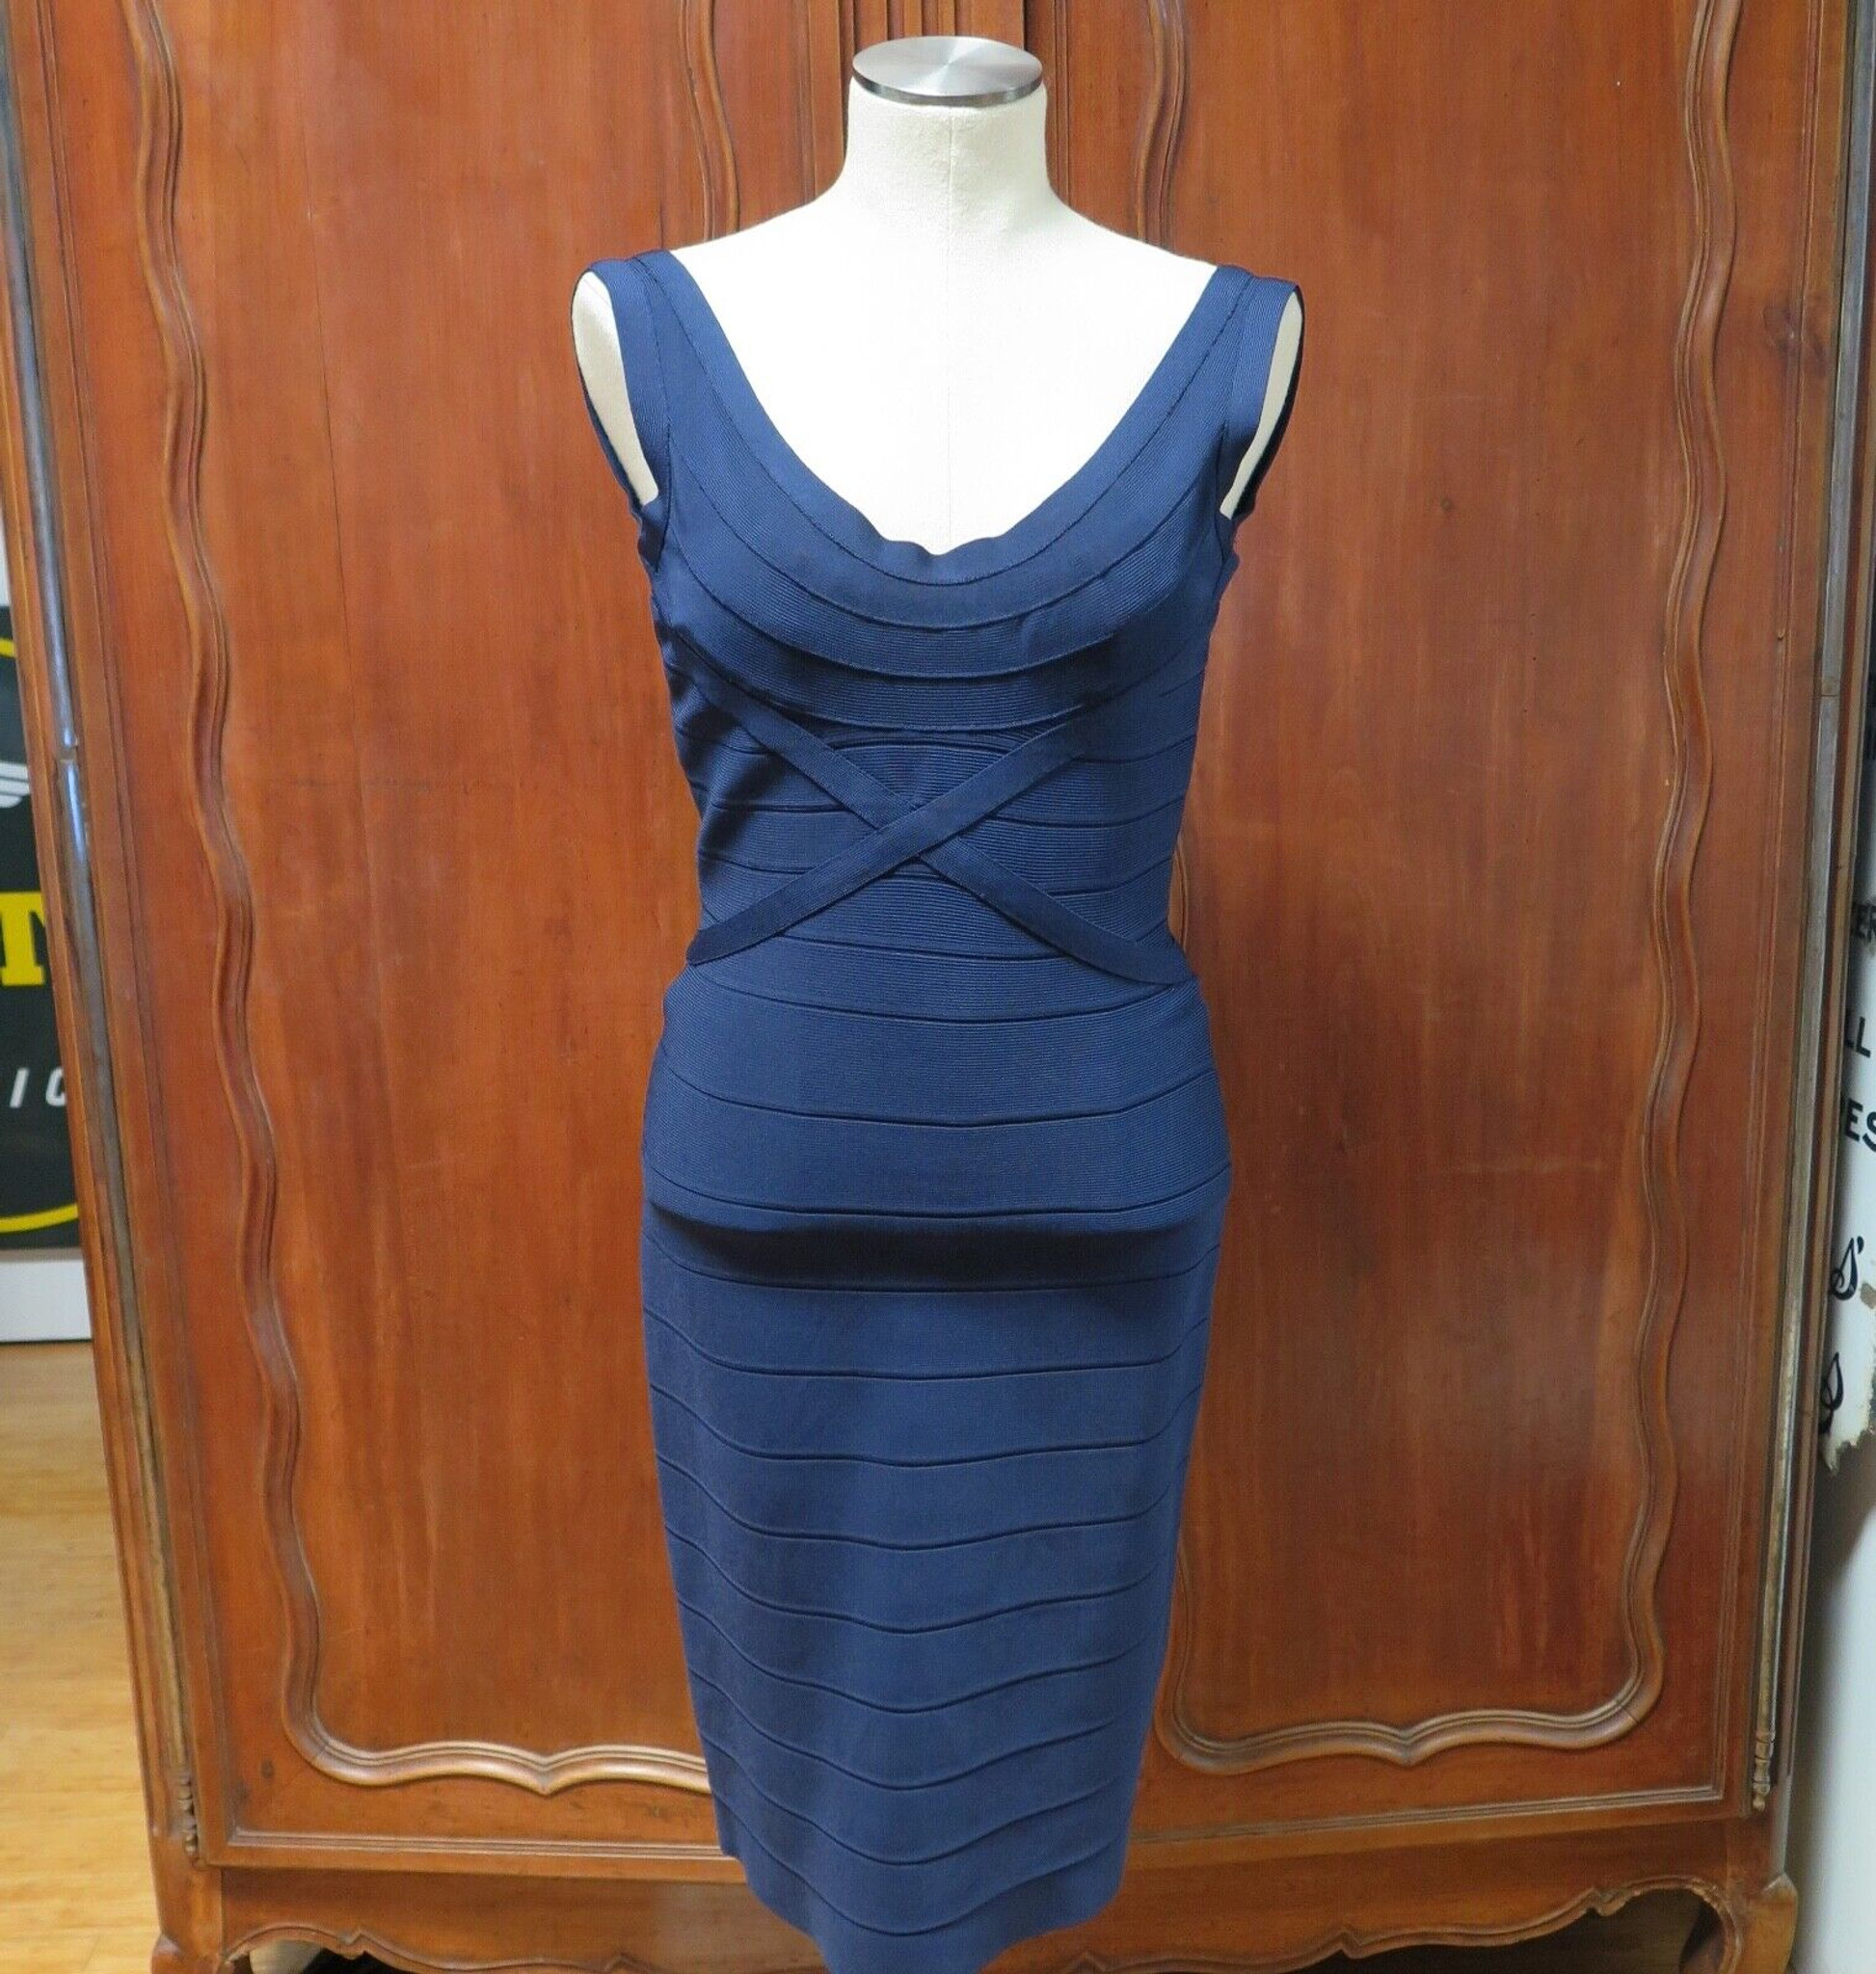 Chic herve leger bandage dress In A Variety Of Stylish Designs 